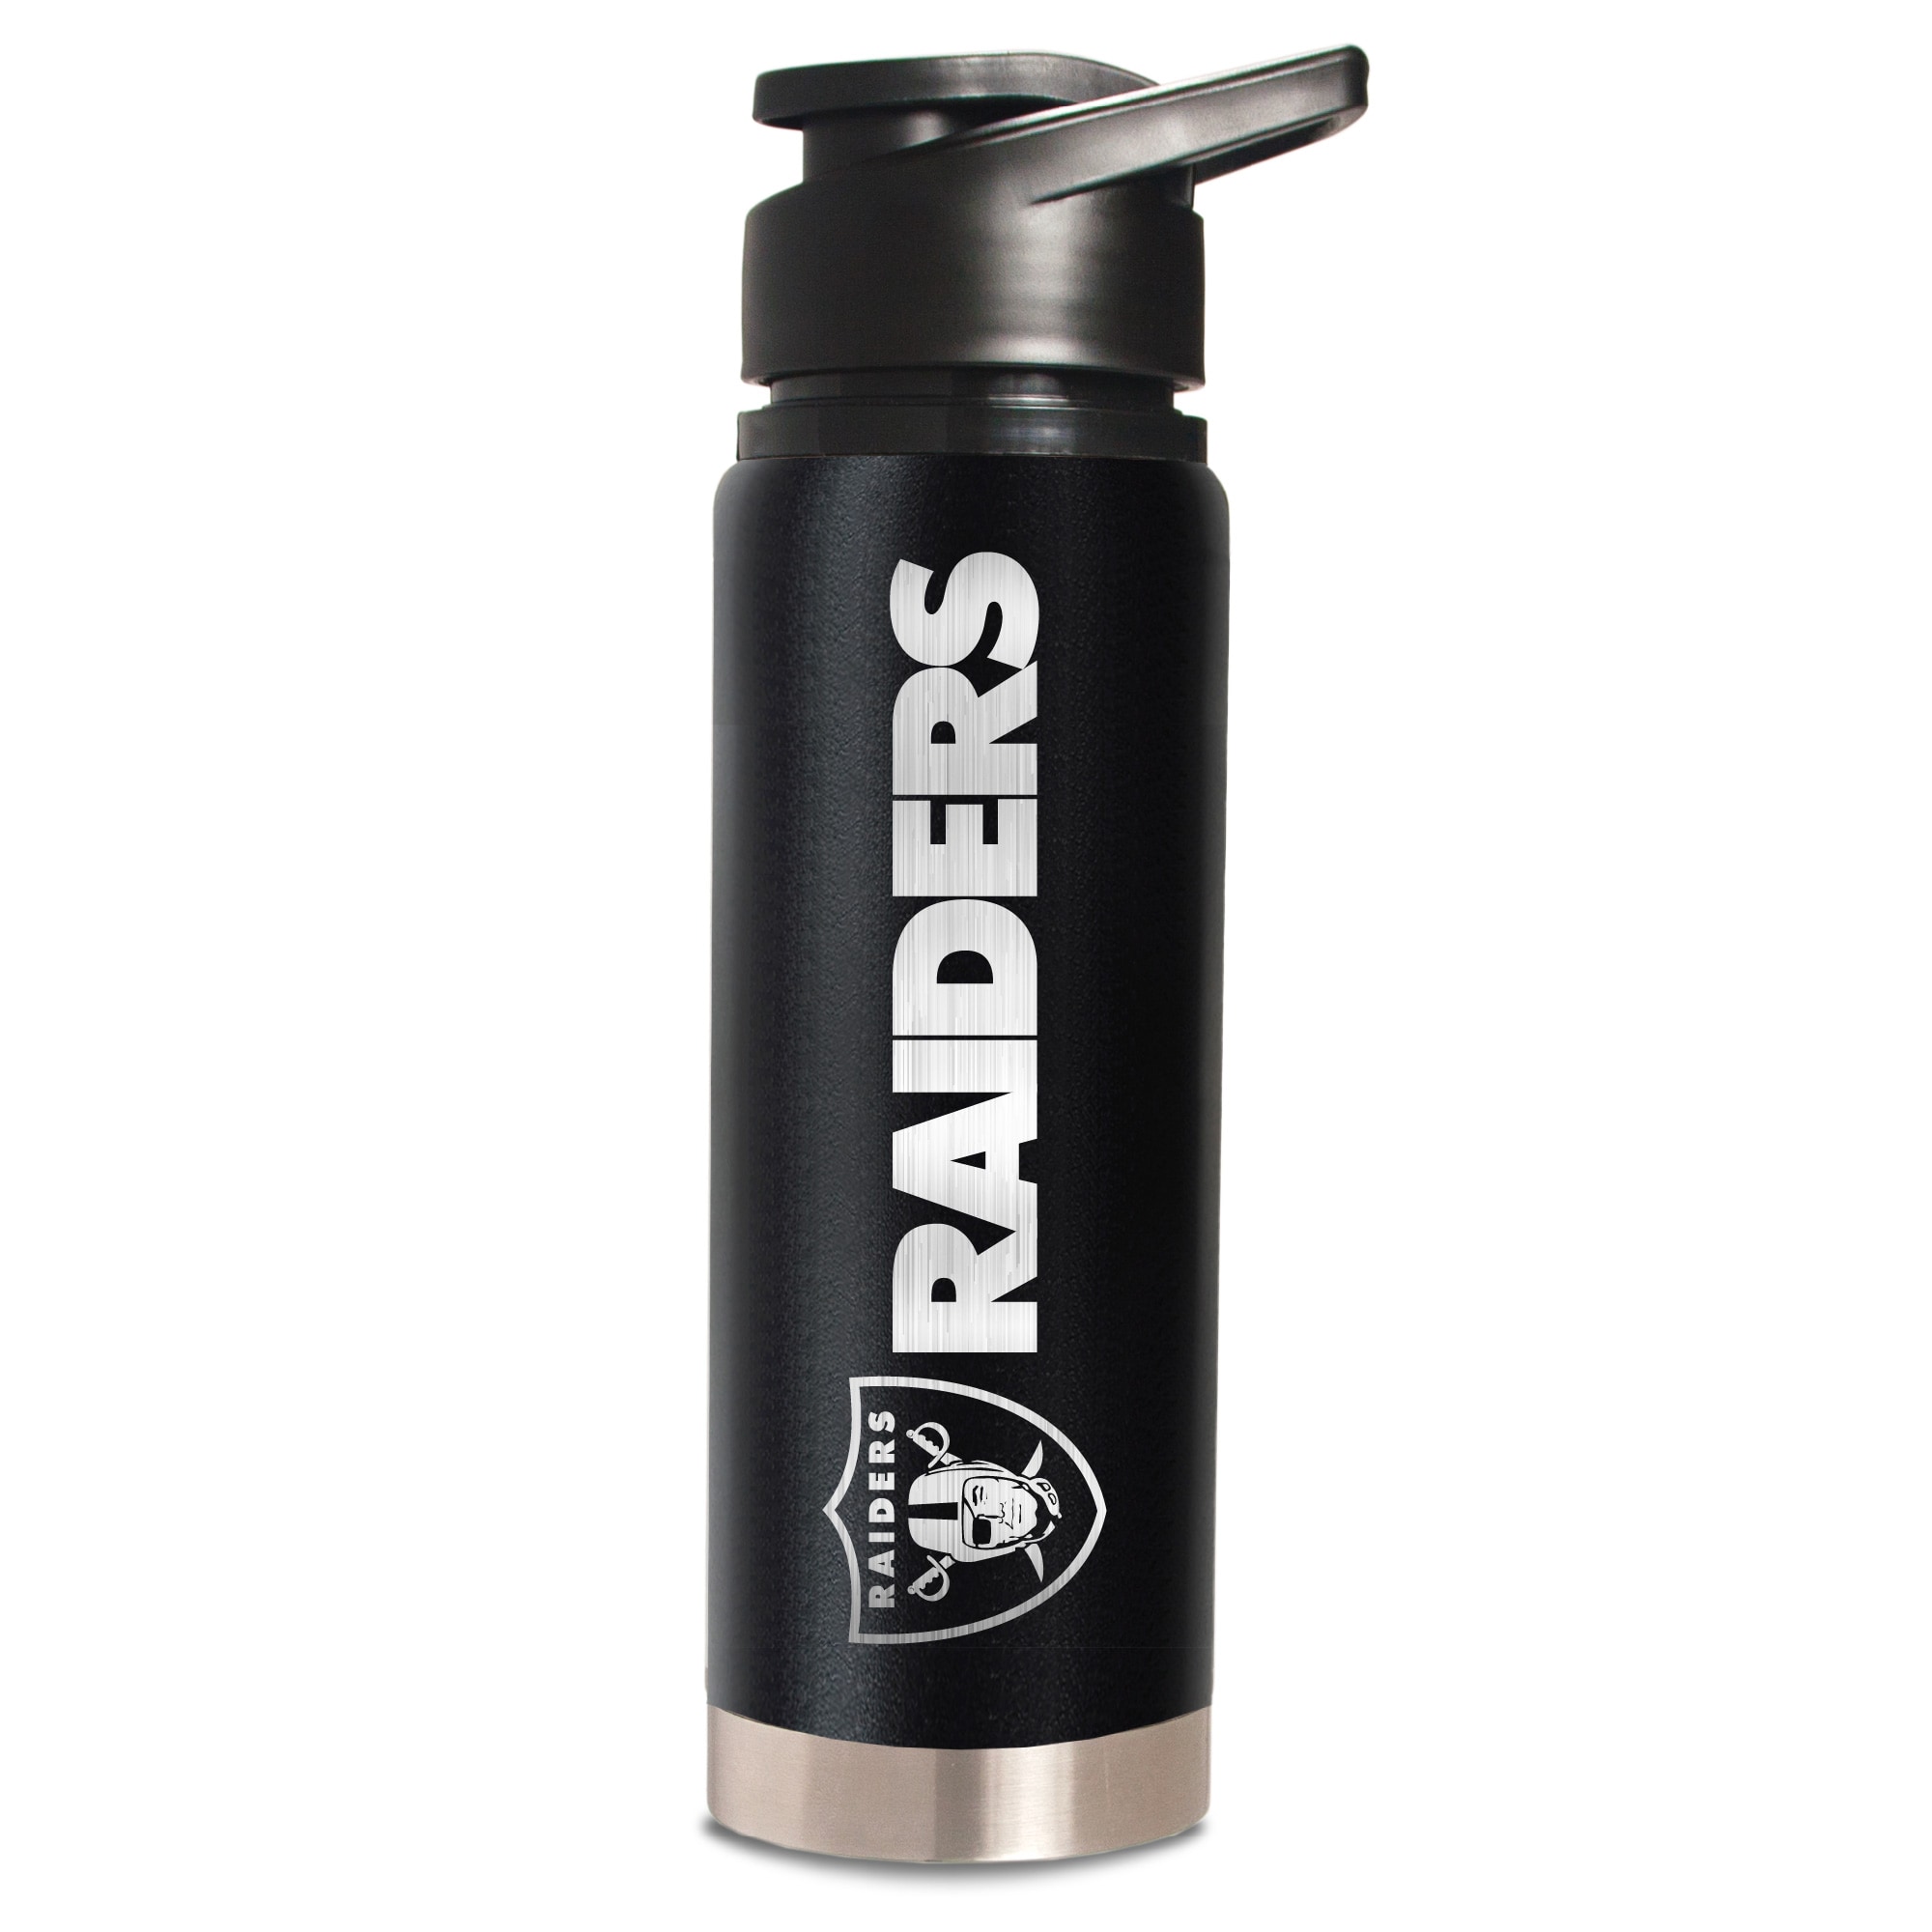 Officially Licensed NFL Team Graphics Thermos - Raiders